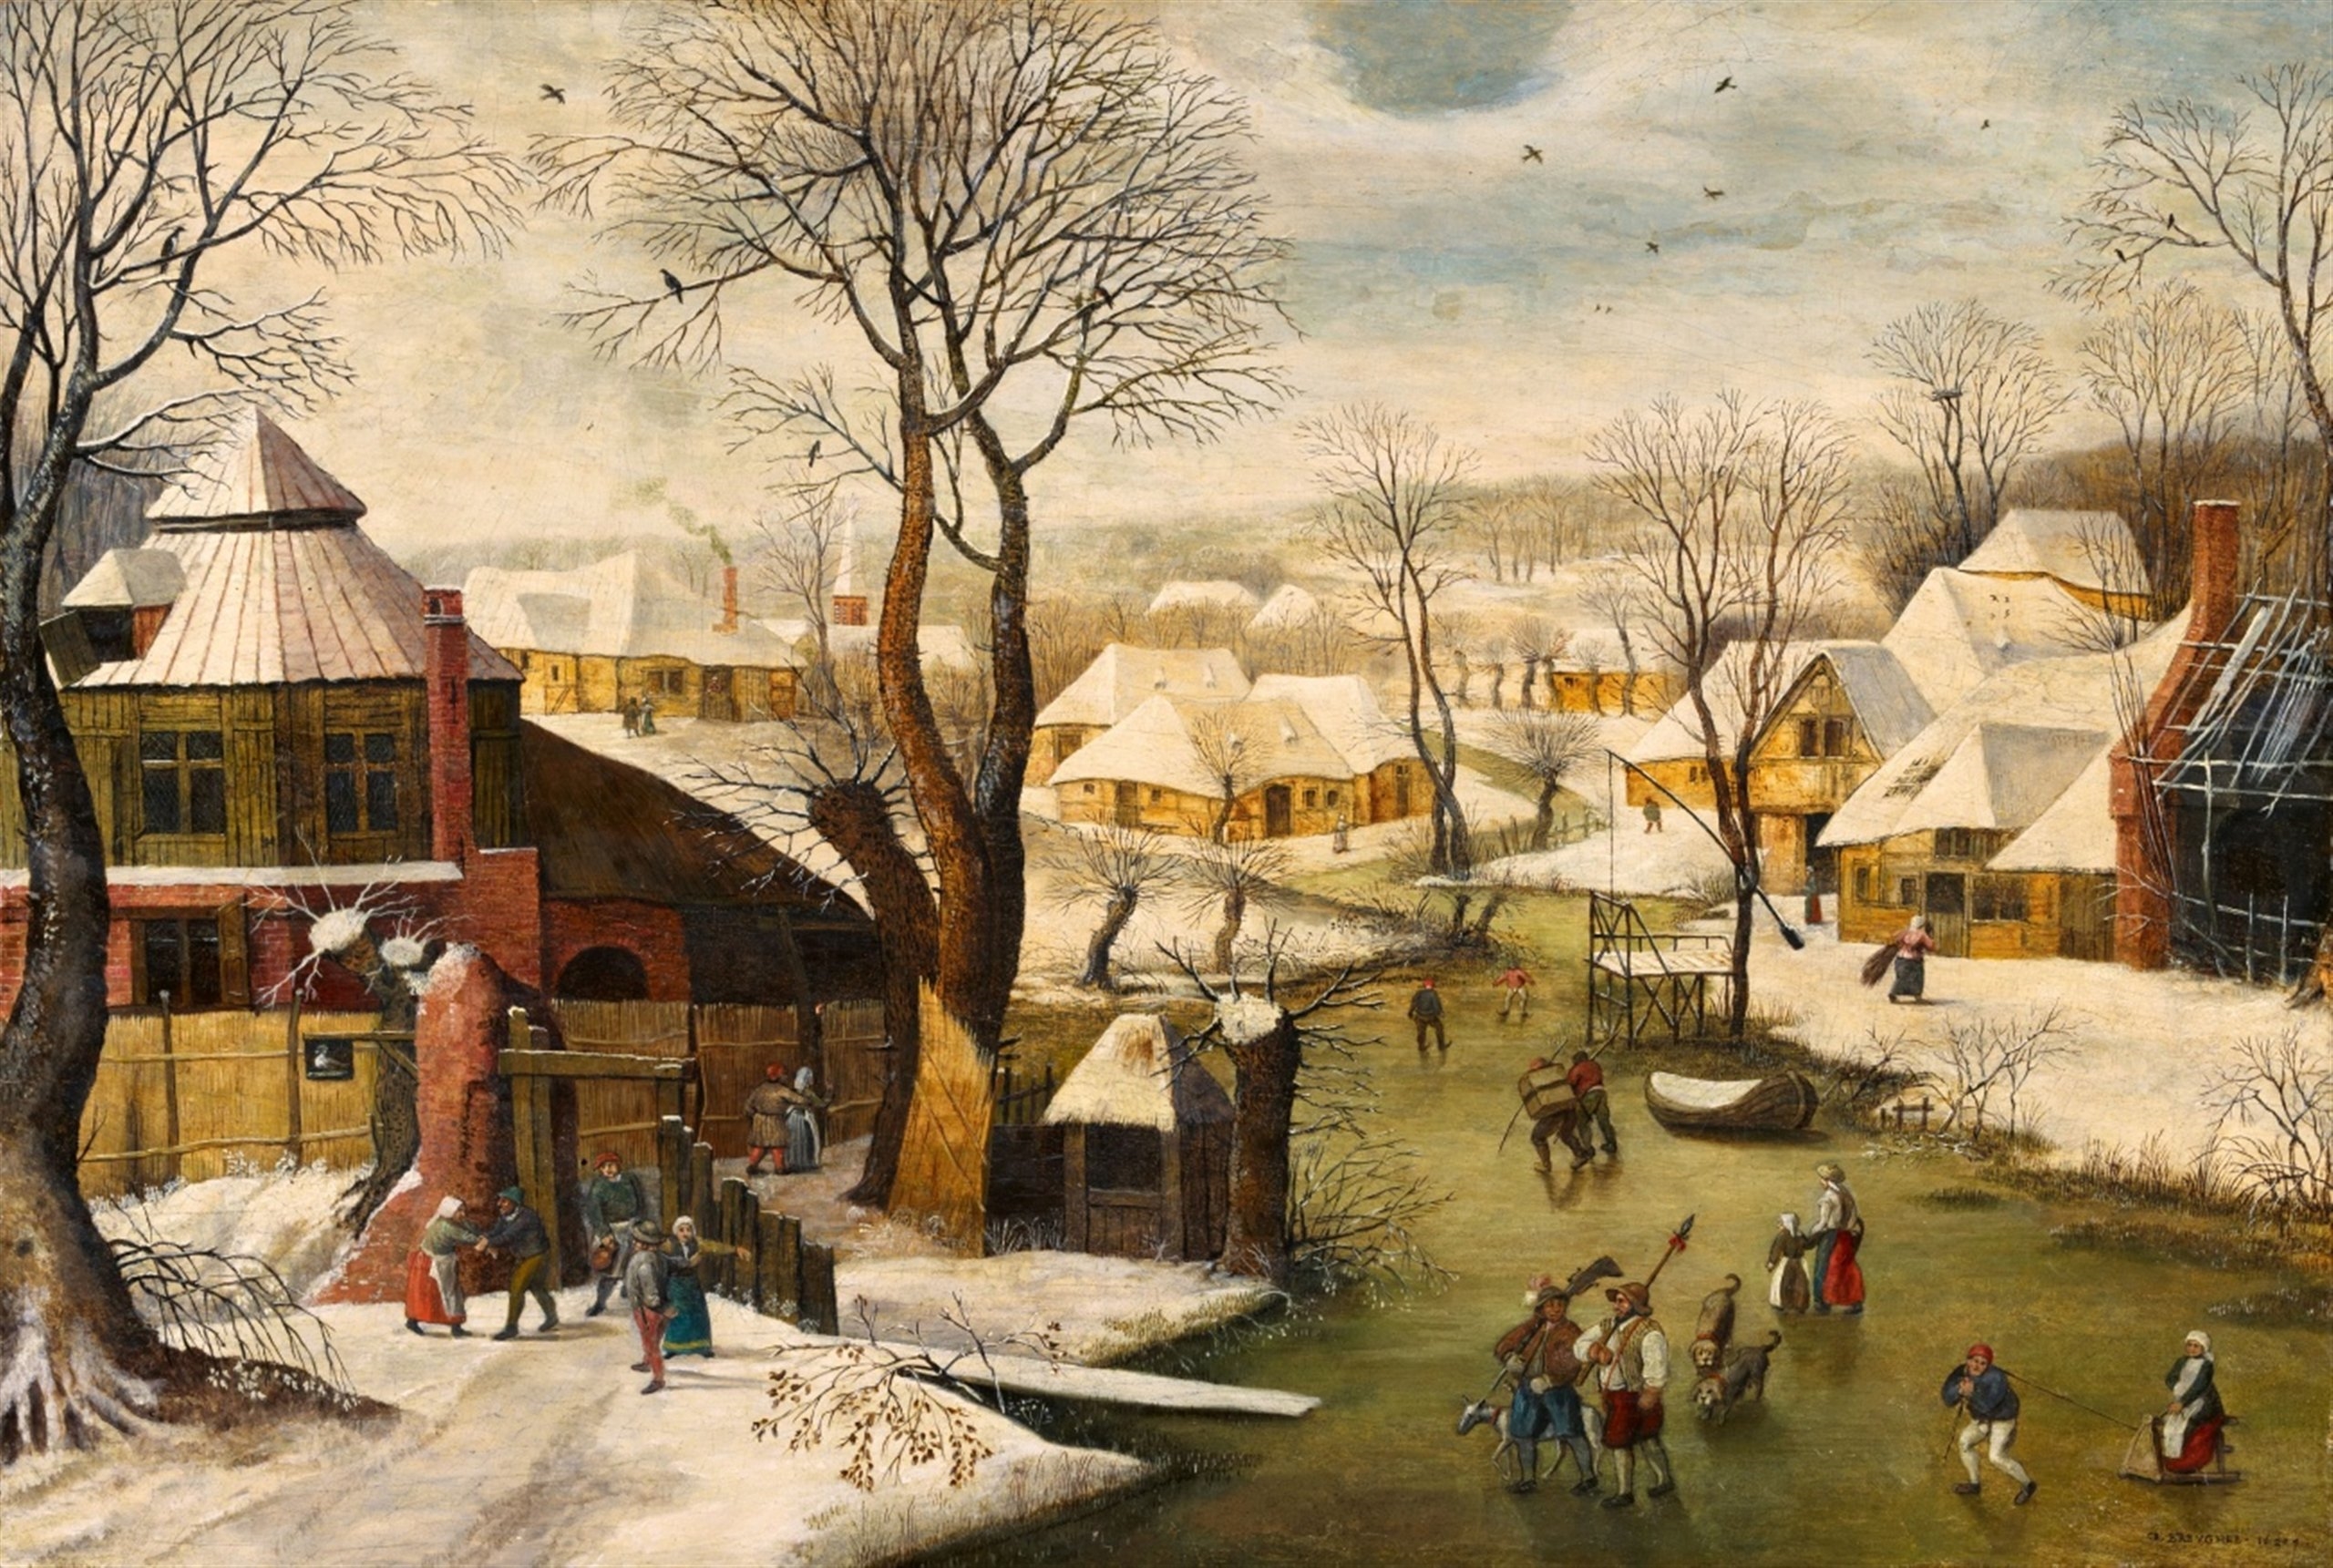 Winter Village Landscape with "The Swan" Tavern by Pieter Brueghel the Younger